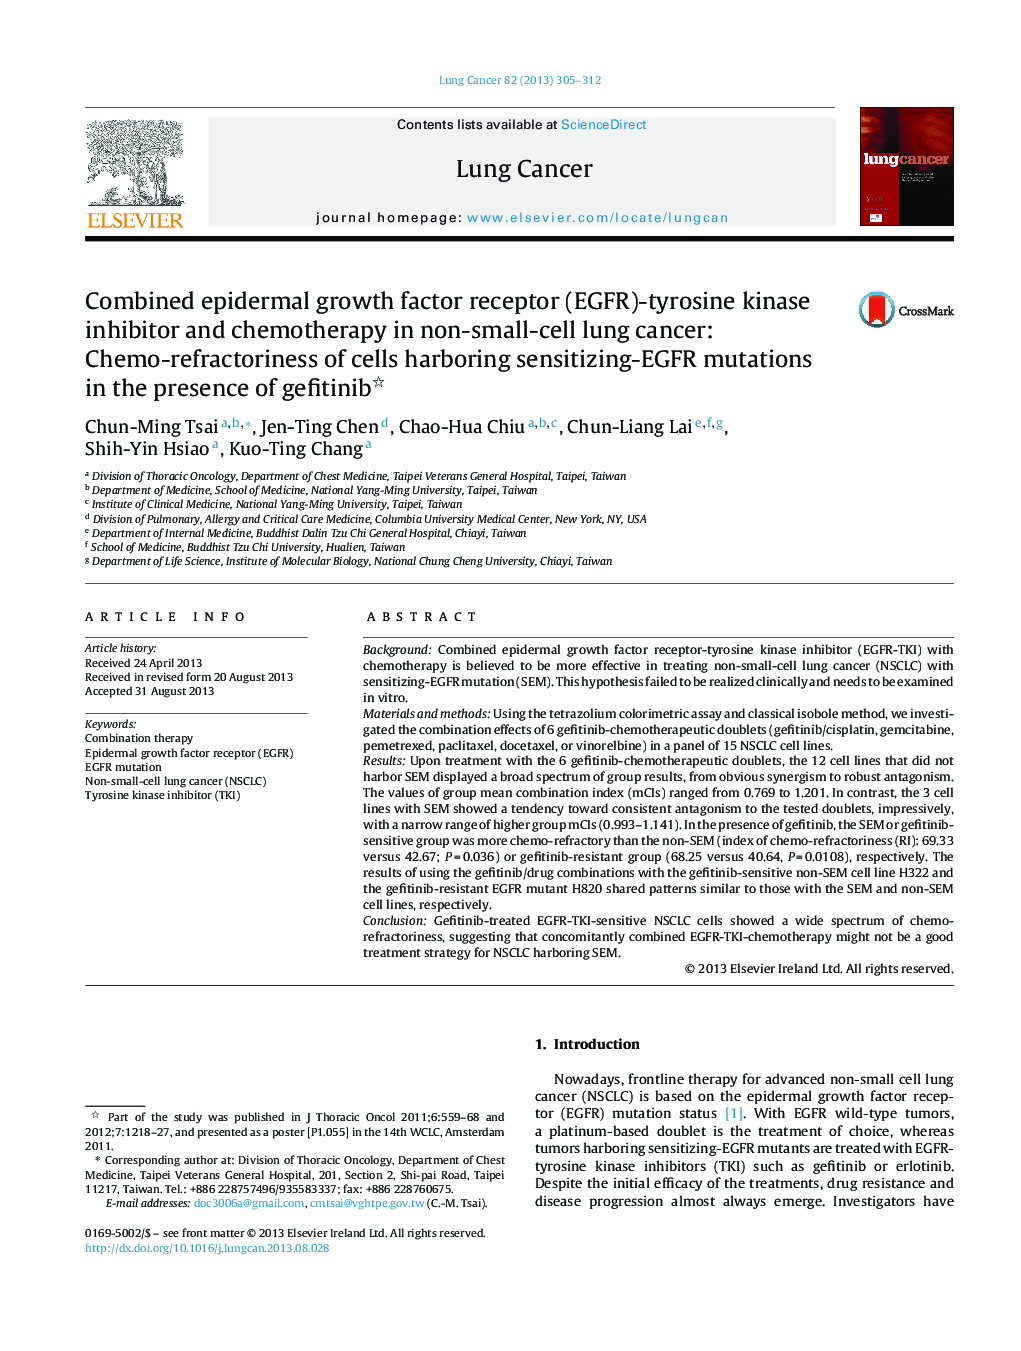 Combined epidermal growth factor receptor (EGFR)-tyrosine kinase inhibitor and chemotherapy in non-small-cell lung cancer: Chemo-refractoriness of cells harboring sensitizing-EGFR mutations in the presence of gefitinib